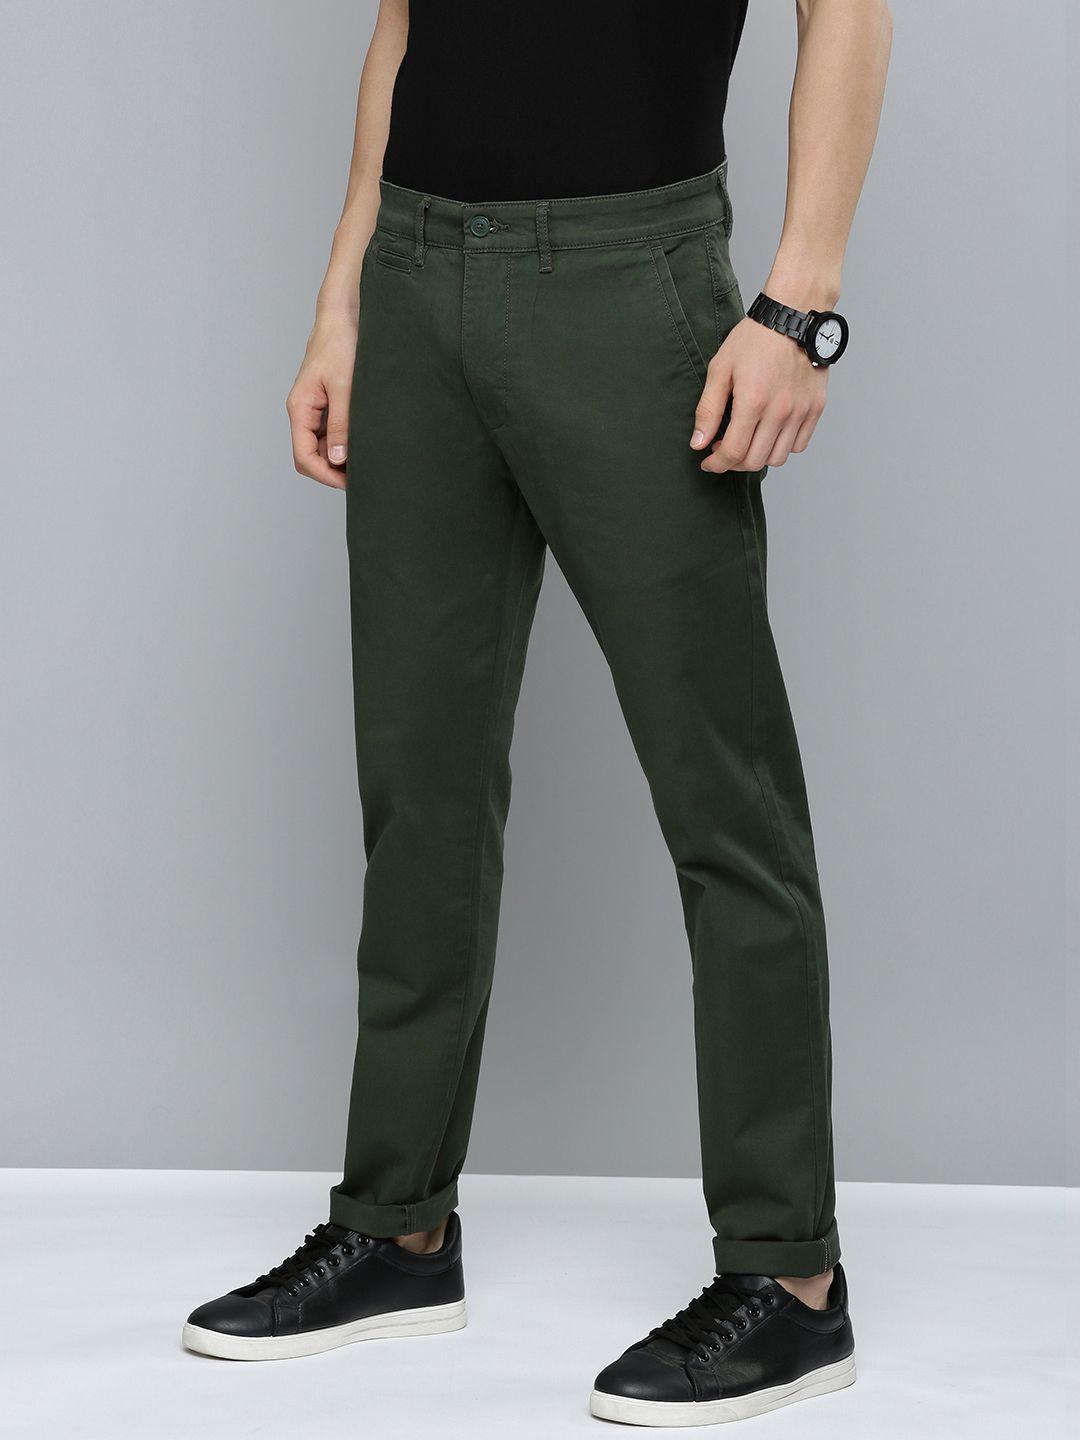 levis-men-green-slim-fit-chinos-trousers